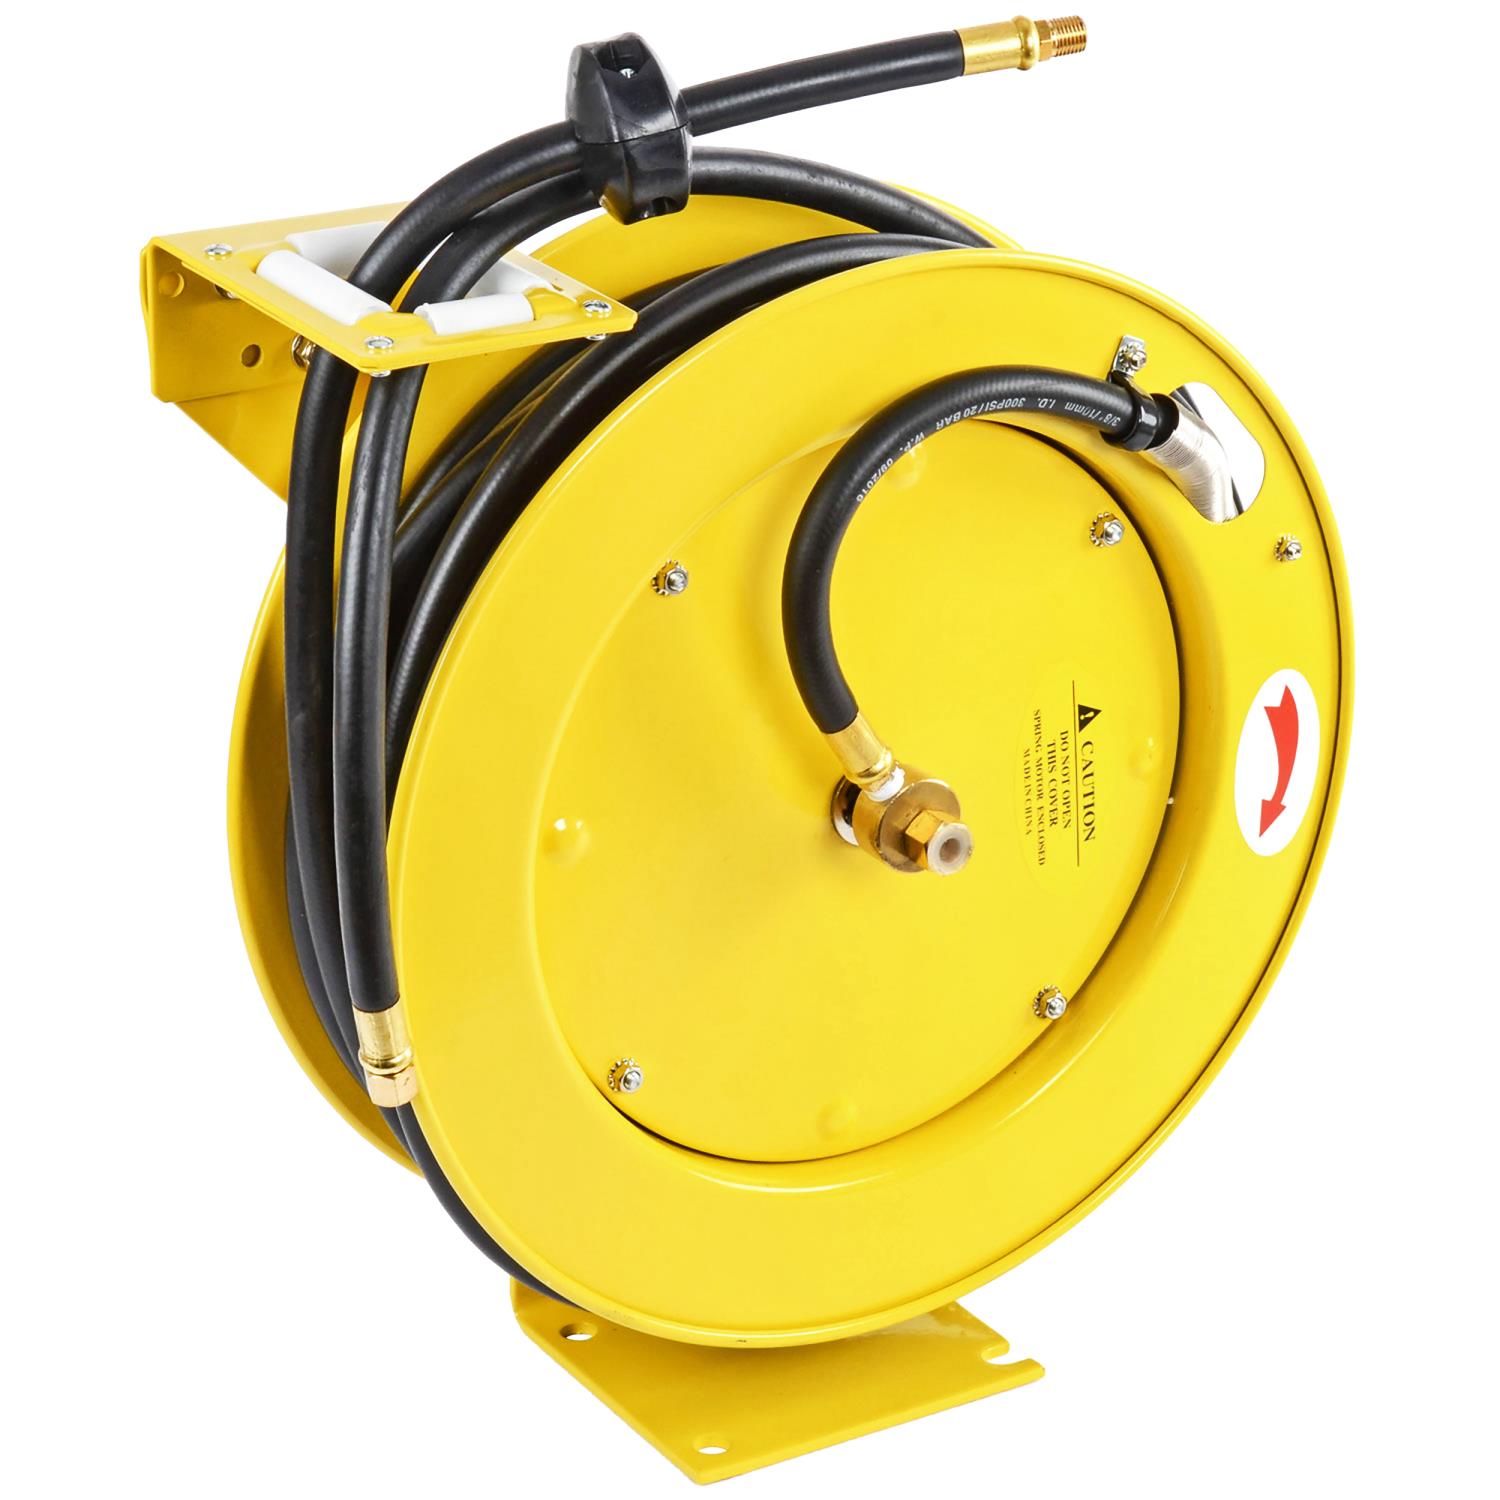 Retractable Air Hose Reel with 3/8 in. x 50 ft. Rubber Hose